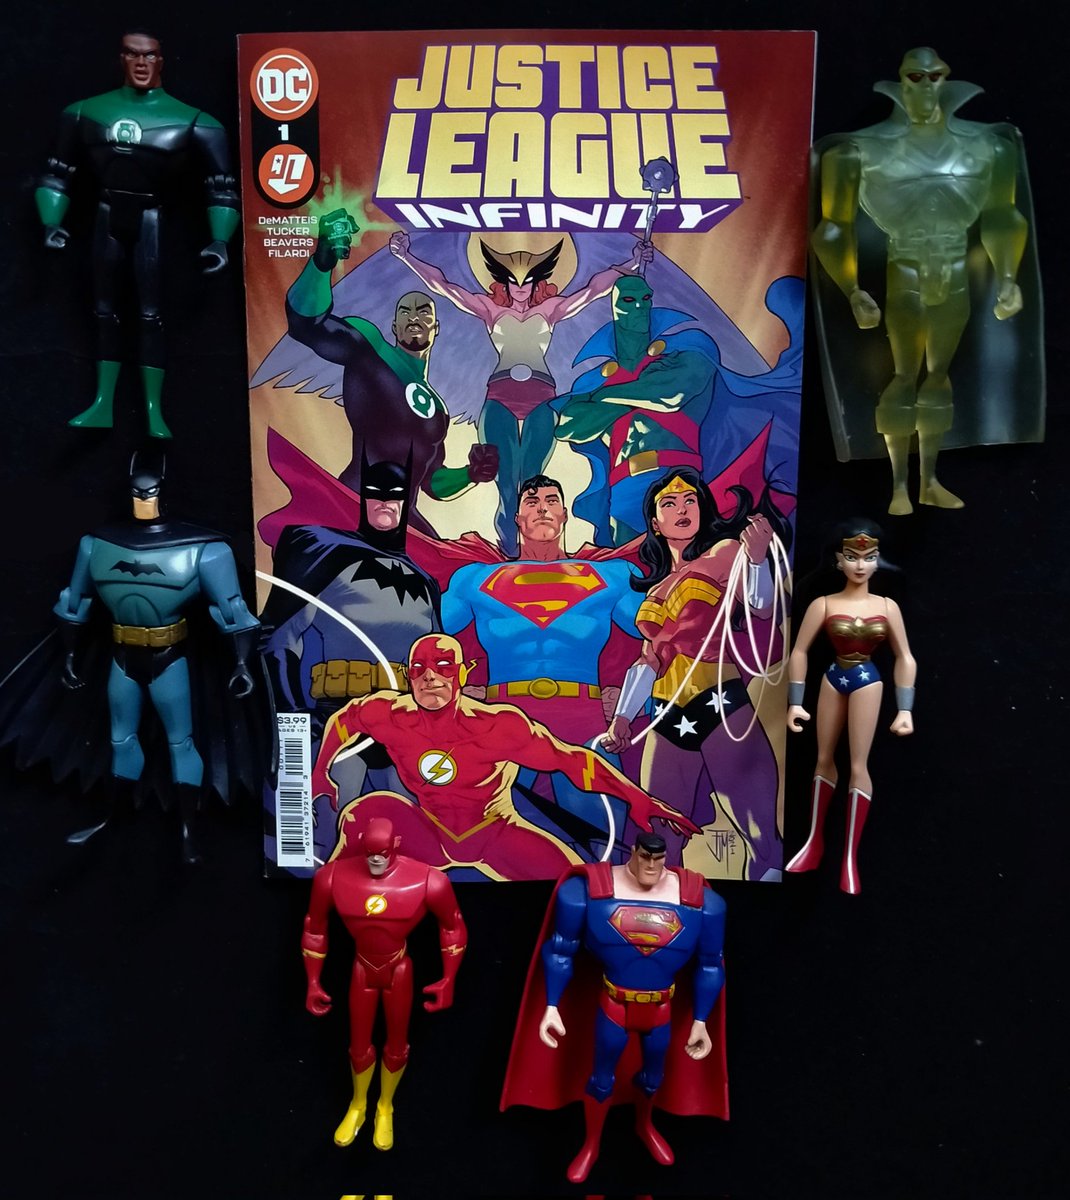 Finally got my hands on a copy after all the delays from my LCS.
Also,it's a AWESOME read. Can't wait for issue 2!
#JusticeLeagueInfinity #JLReunion #DCAU